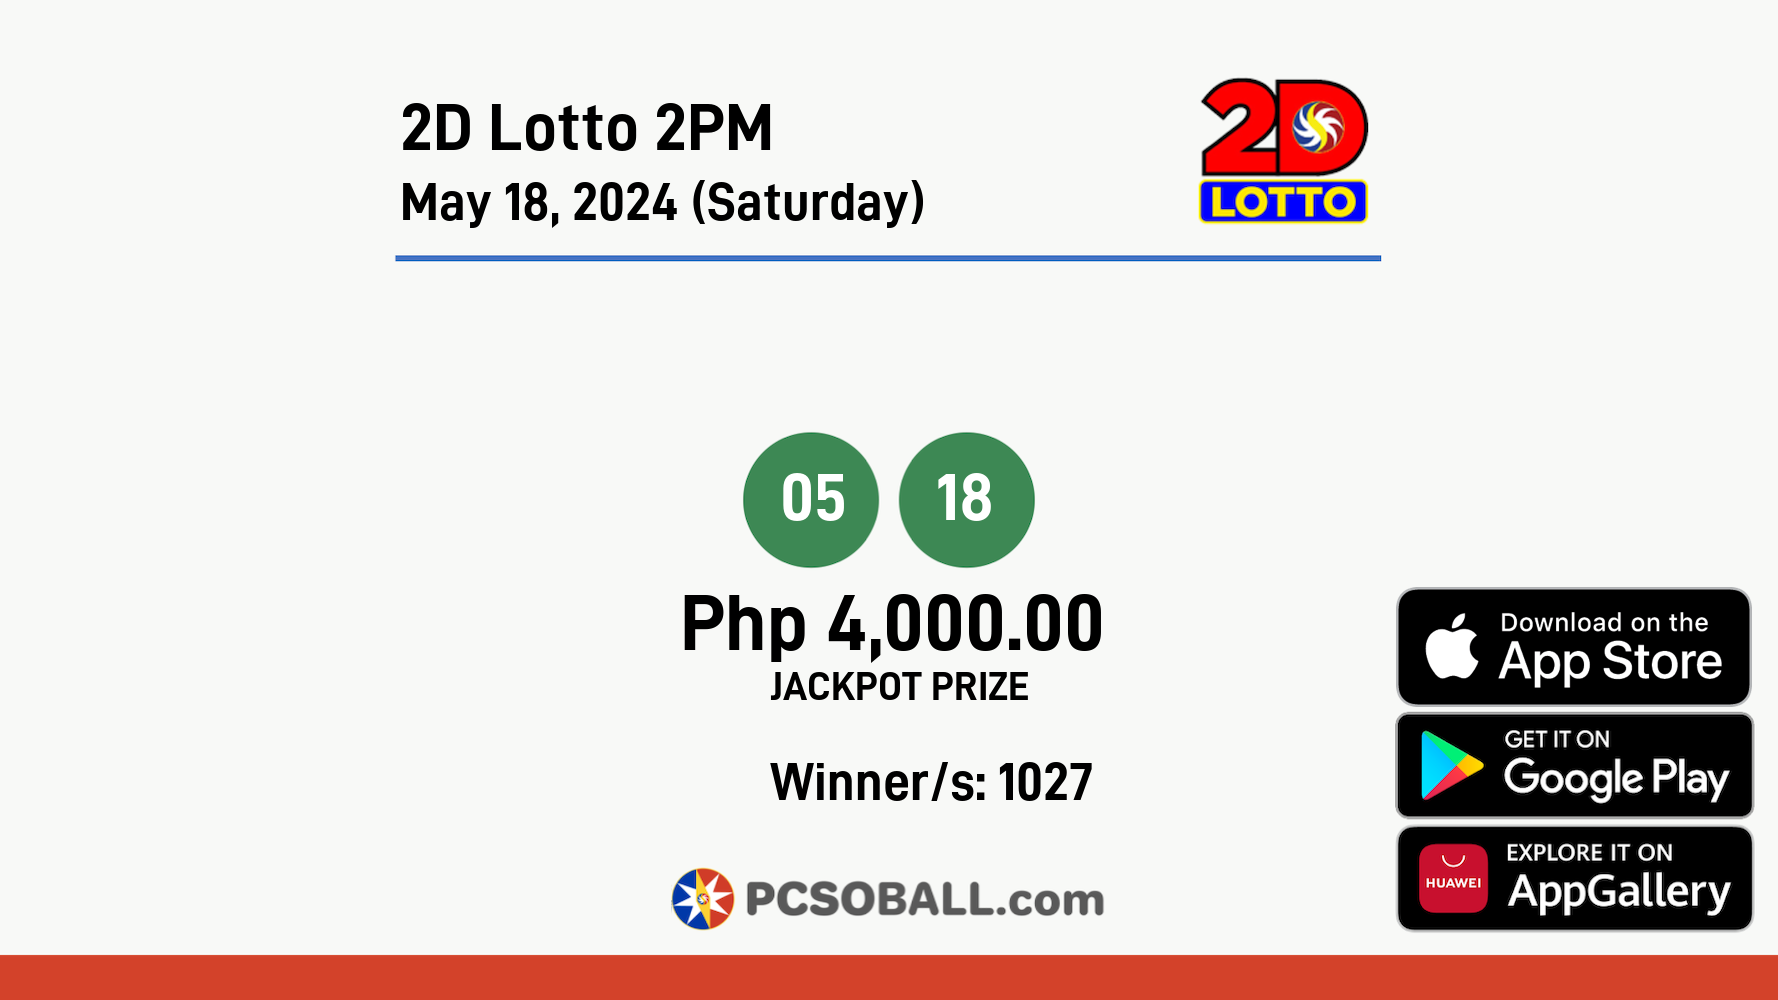 2D Lotto 2PM May 18, 2024 (Saturday) Result